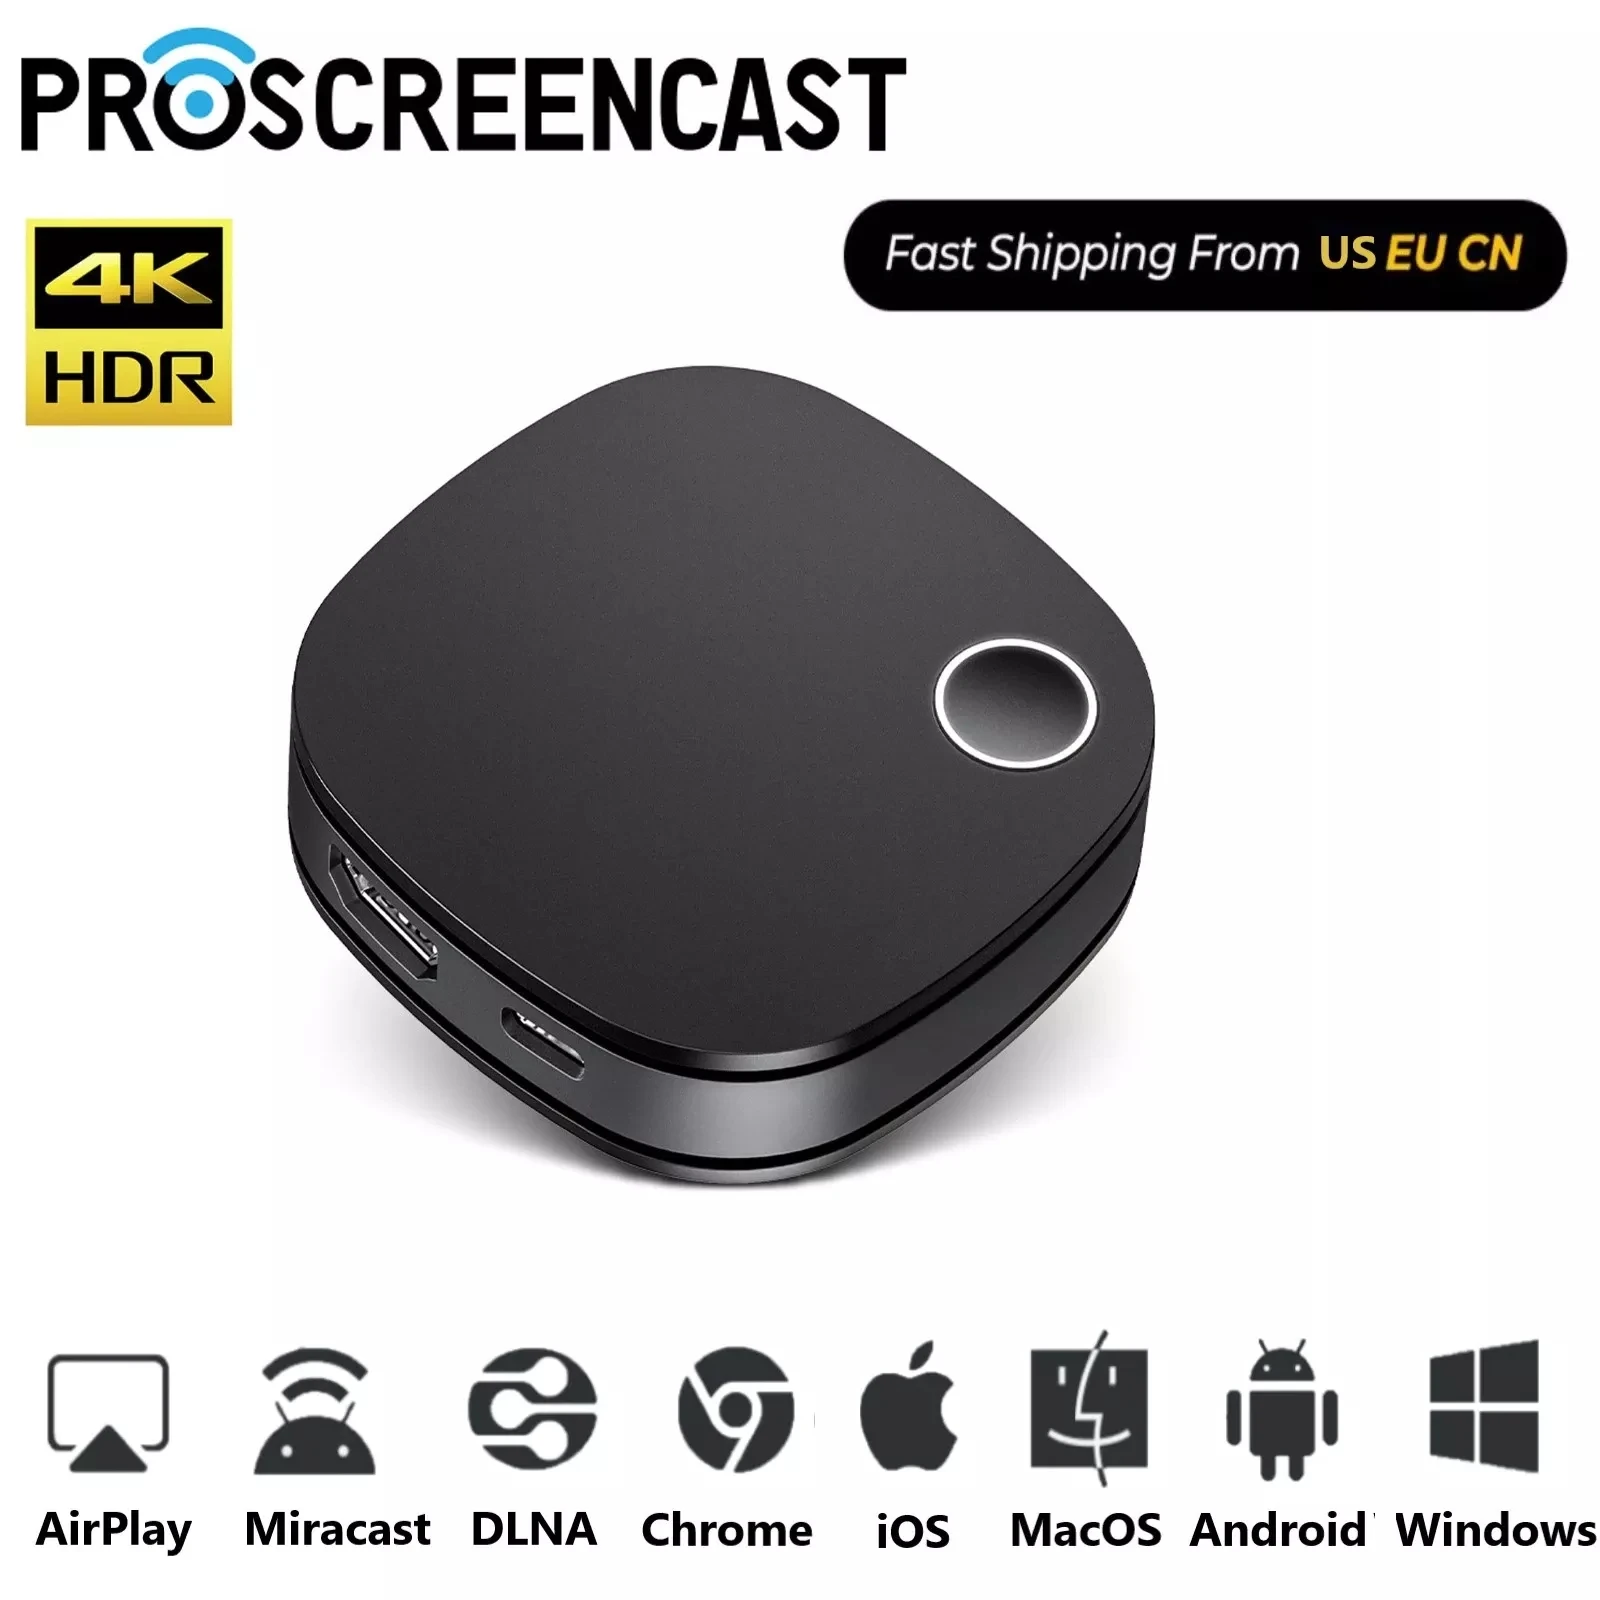 

Proscreencast SC01 2.4G/5G 4K HDR Miracast WiFi Display Receiver Dongle For Airplay DLNA HDMI TV Stick